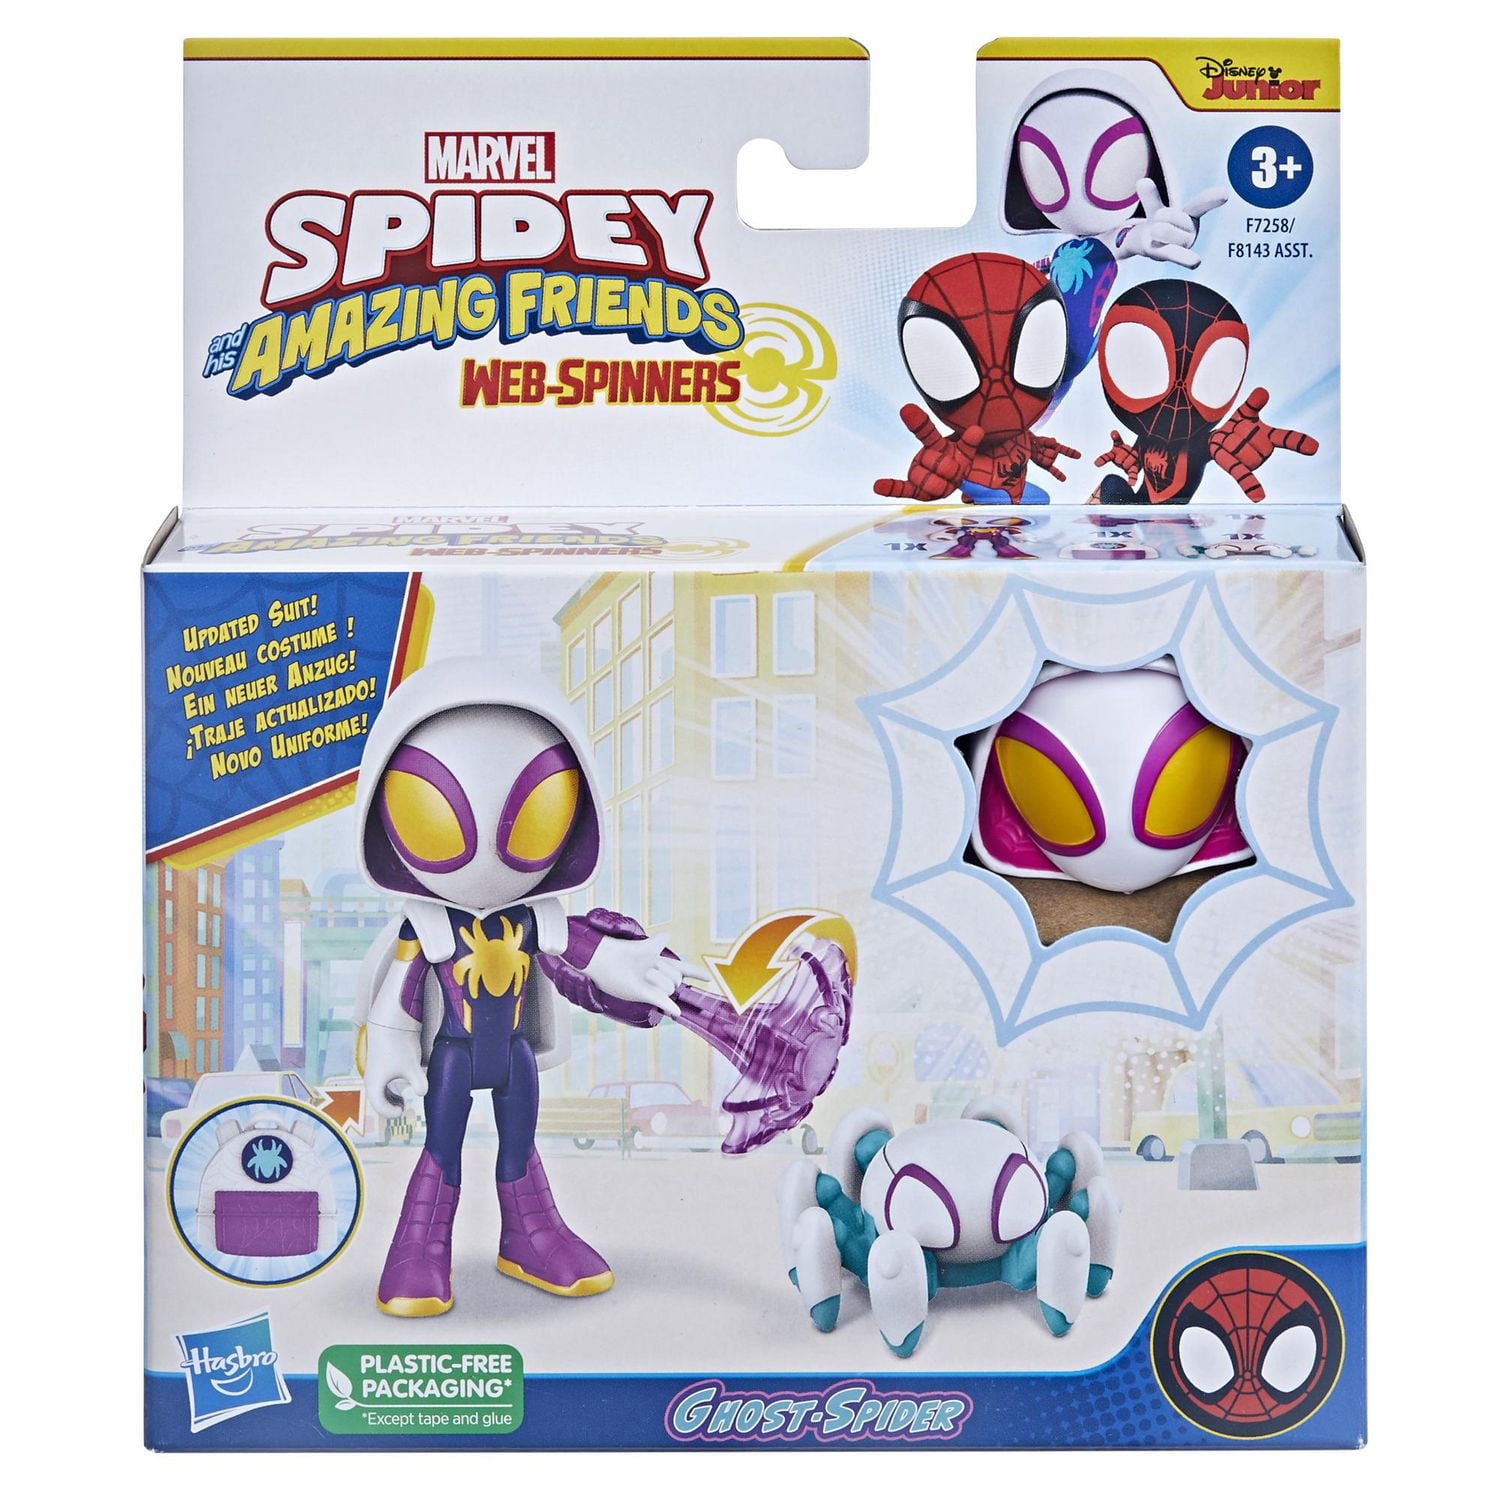 Marvel Spidey and His Amazing Friends Web-Spinners Ghost-Spider